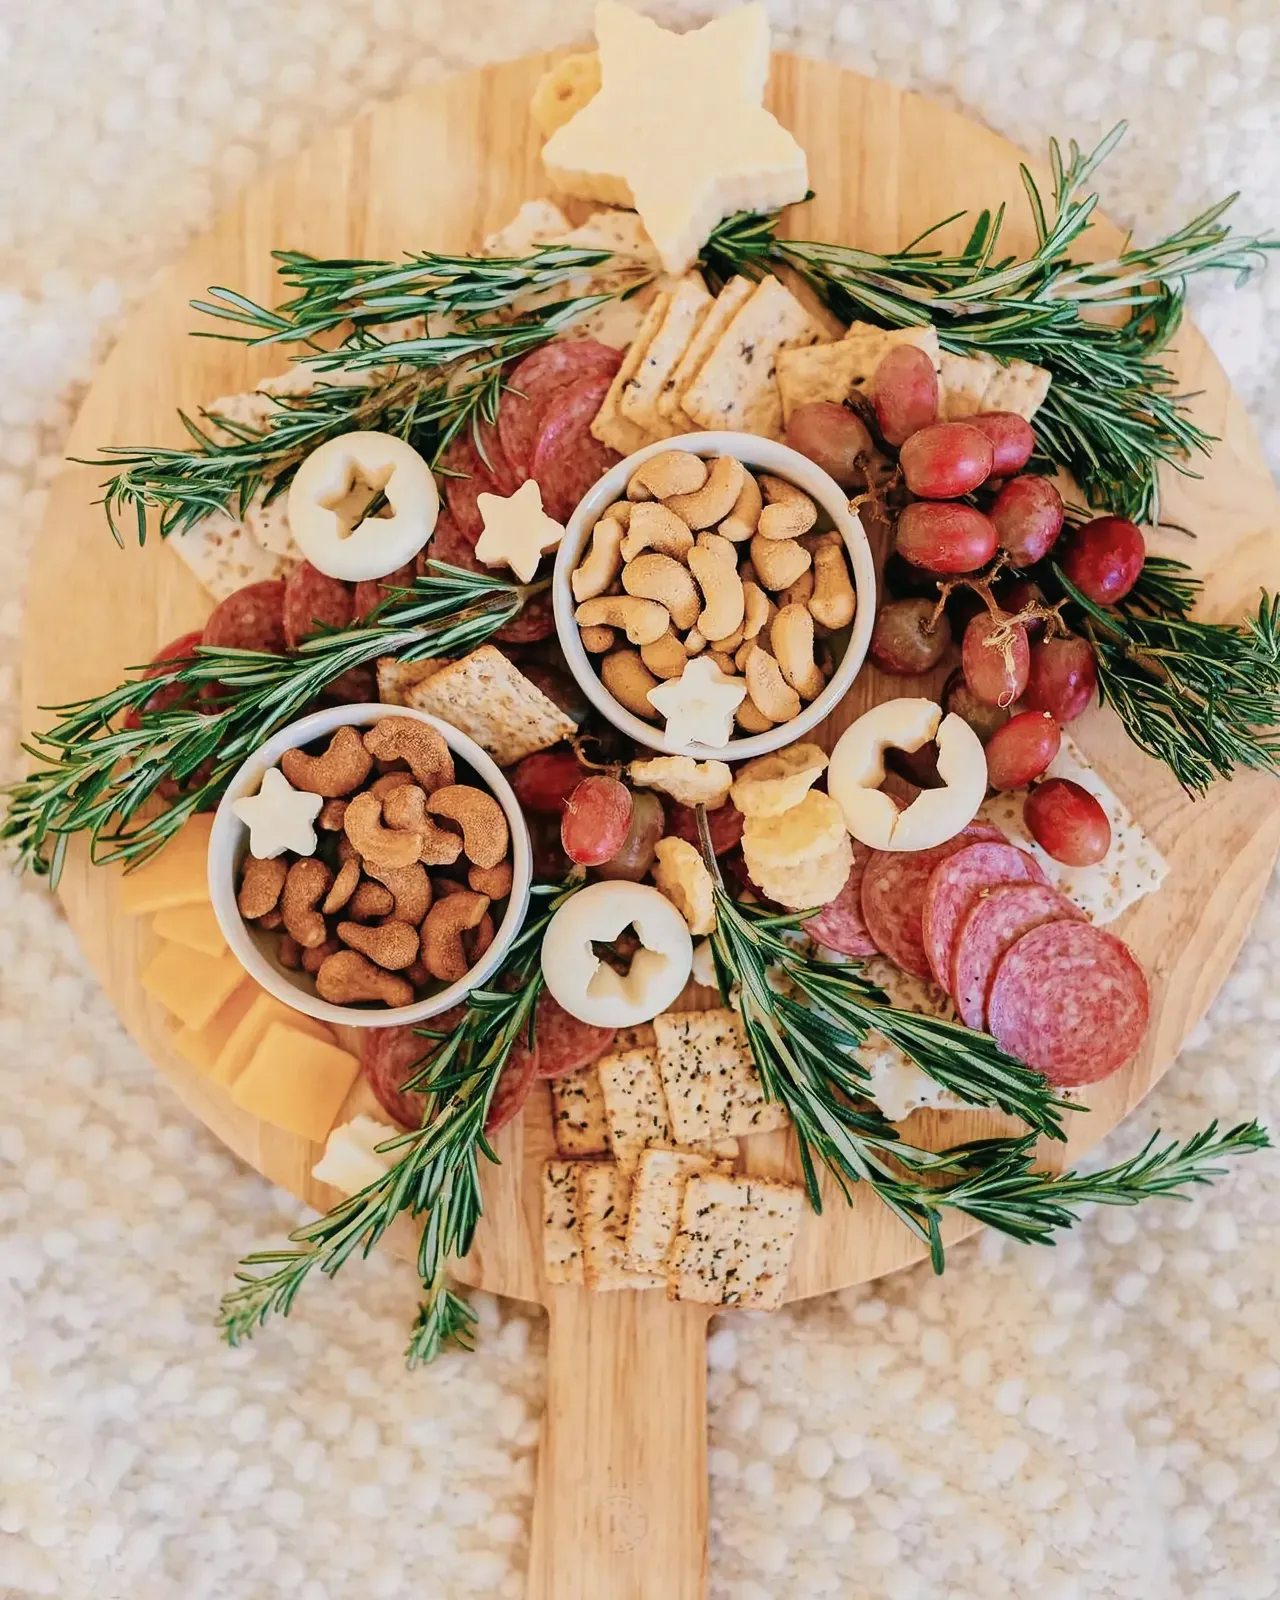 Christmas charcuterie tree with an assortment of cheeses, meats, and fruits.